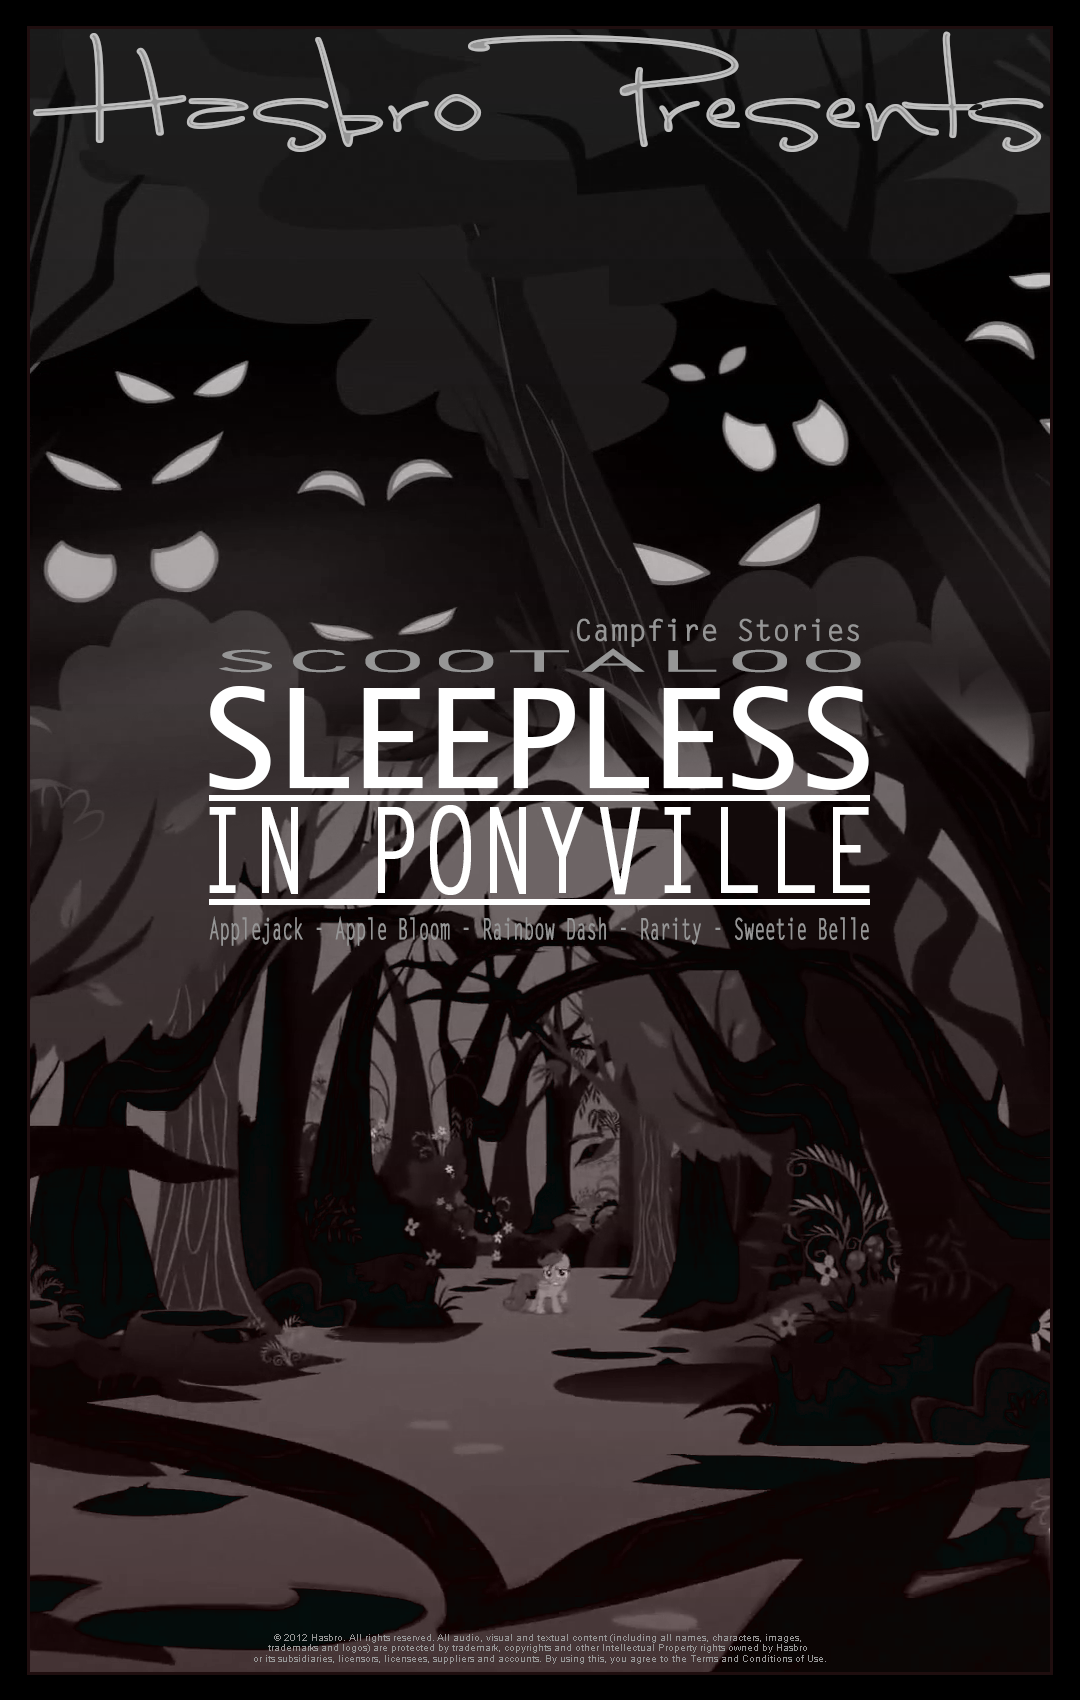 mlp___sleepless_in_ponyville___movie_poster_by_pims1978-d5niz9g.png